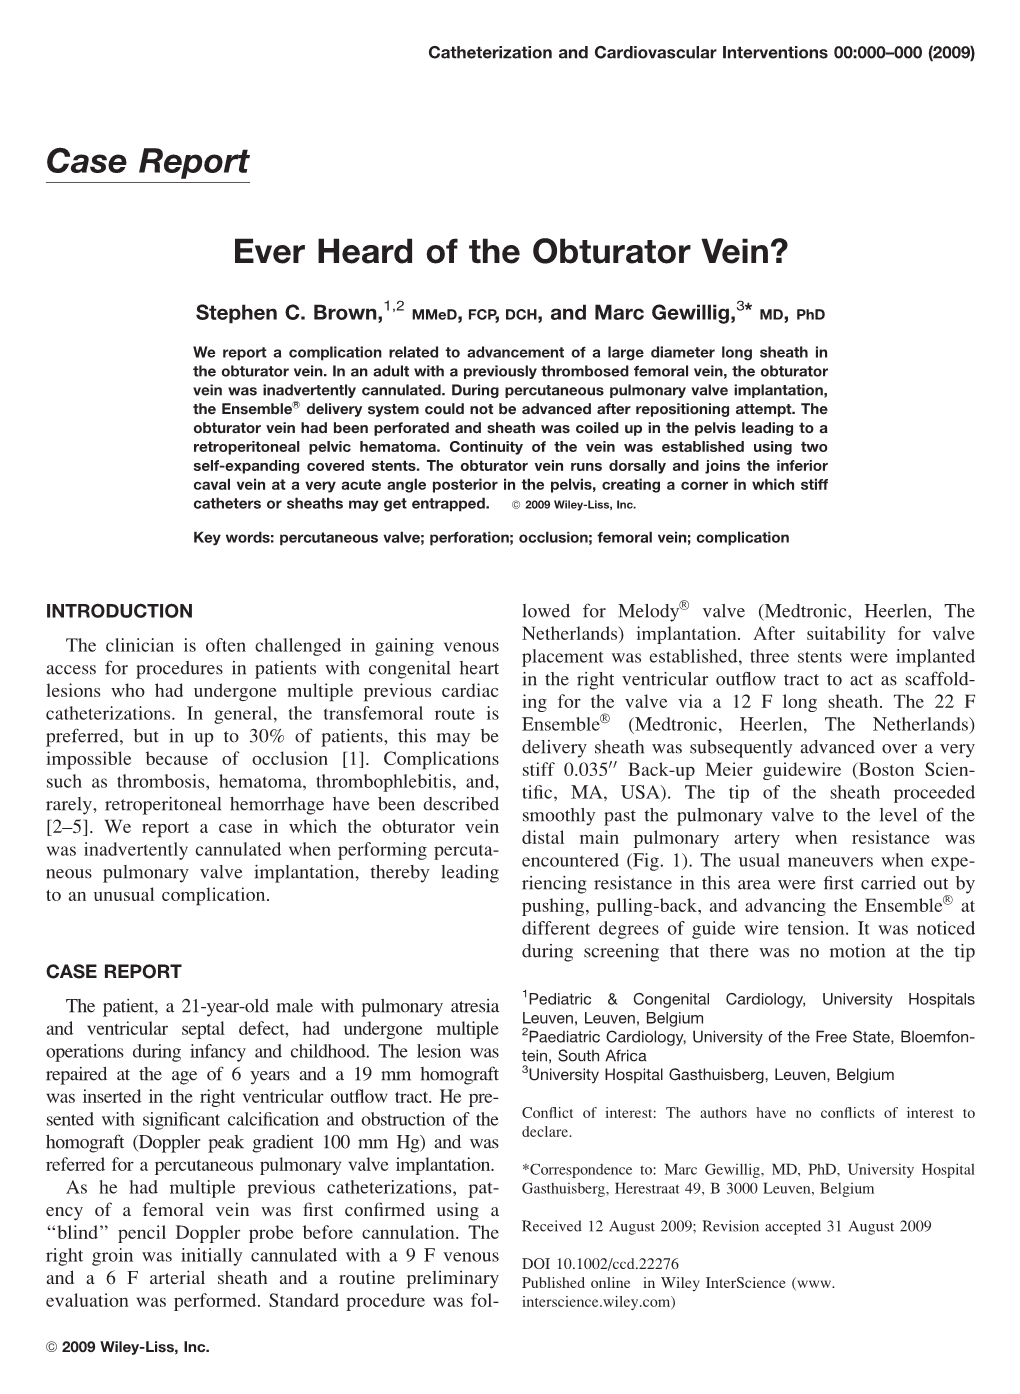 Ever Heard of the Obturator Vein?